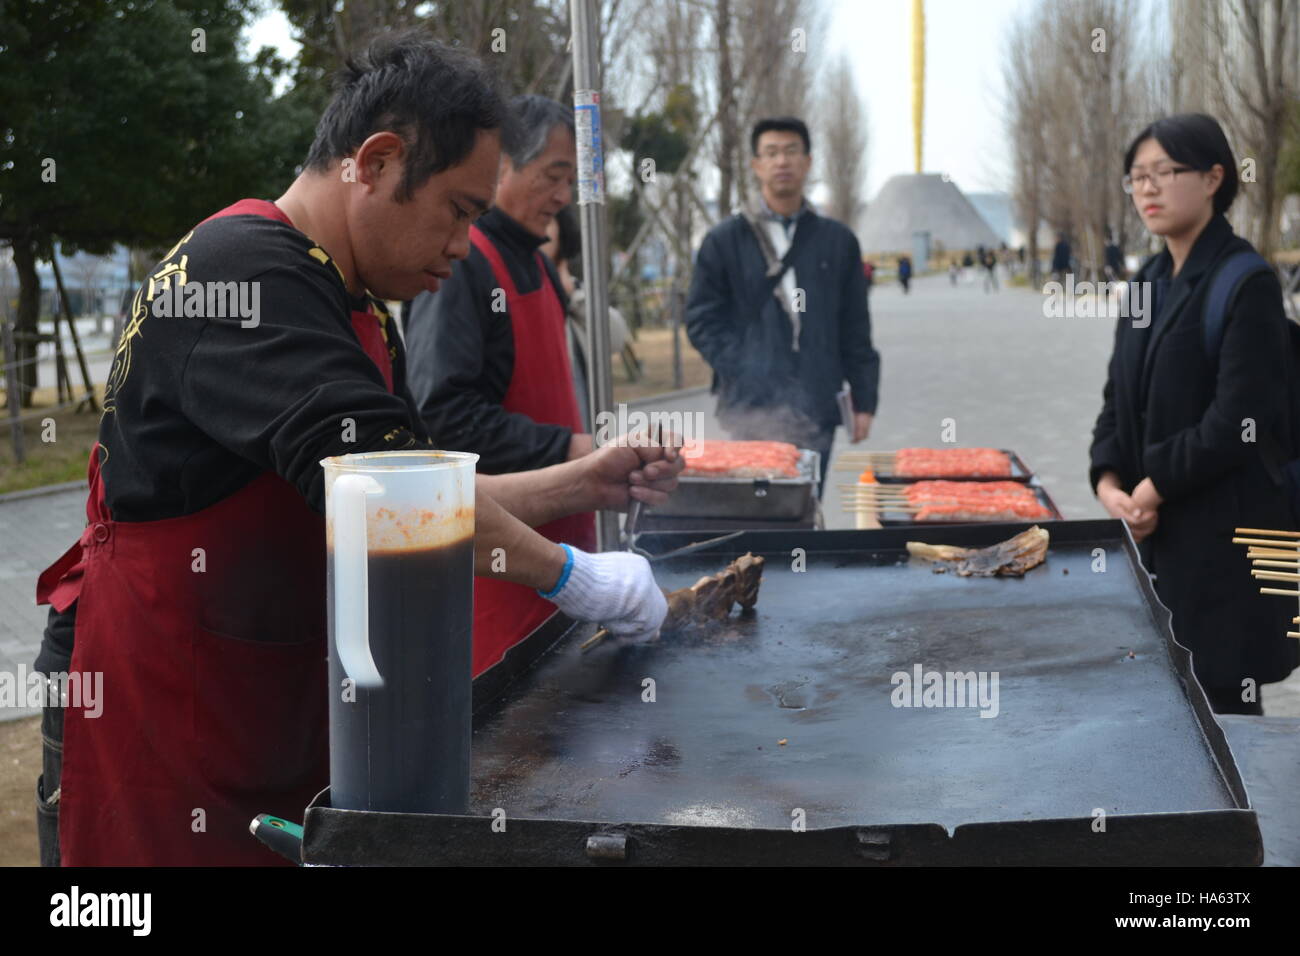 Tokyo, Japan-2/26/16: Two street food vendors grilling yakitori chicken on a portable flat skillet grill while two customers wait for their order. Stock Photo